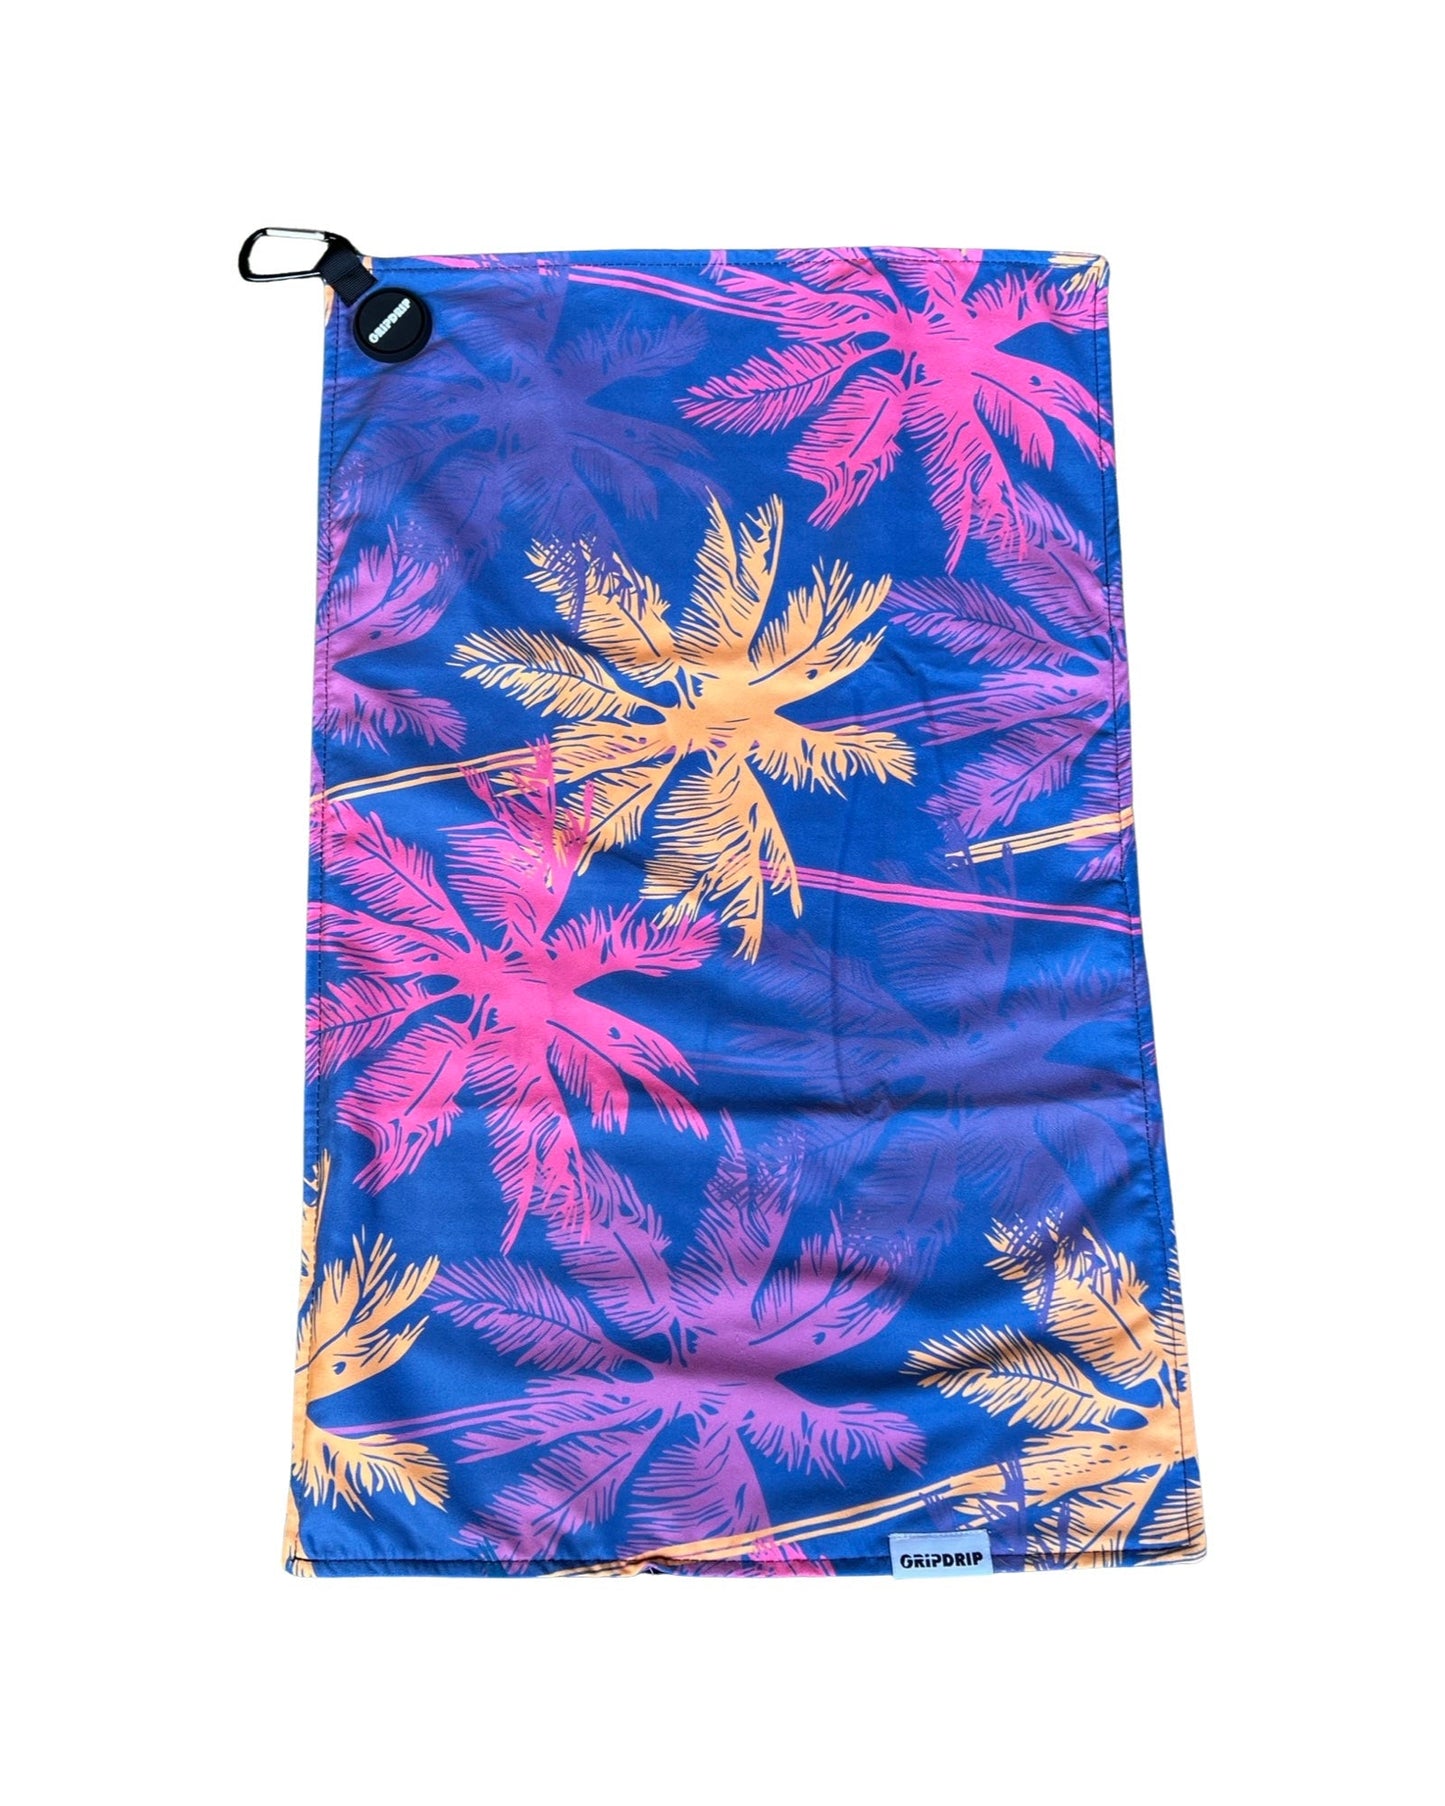 Tropical Vibes - Magnet Towel by GripDrip